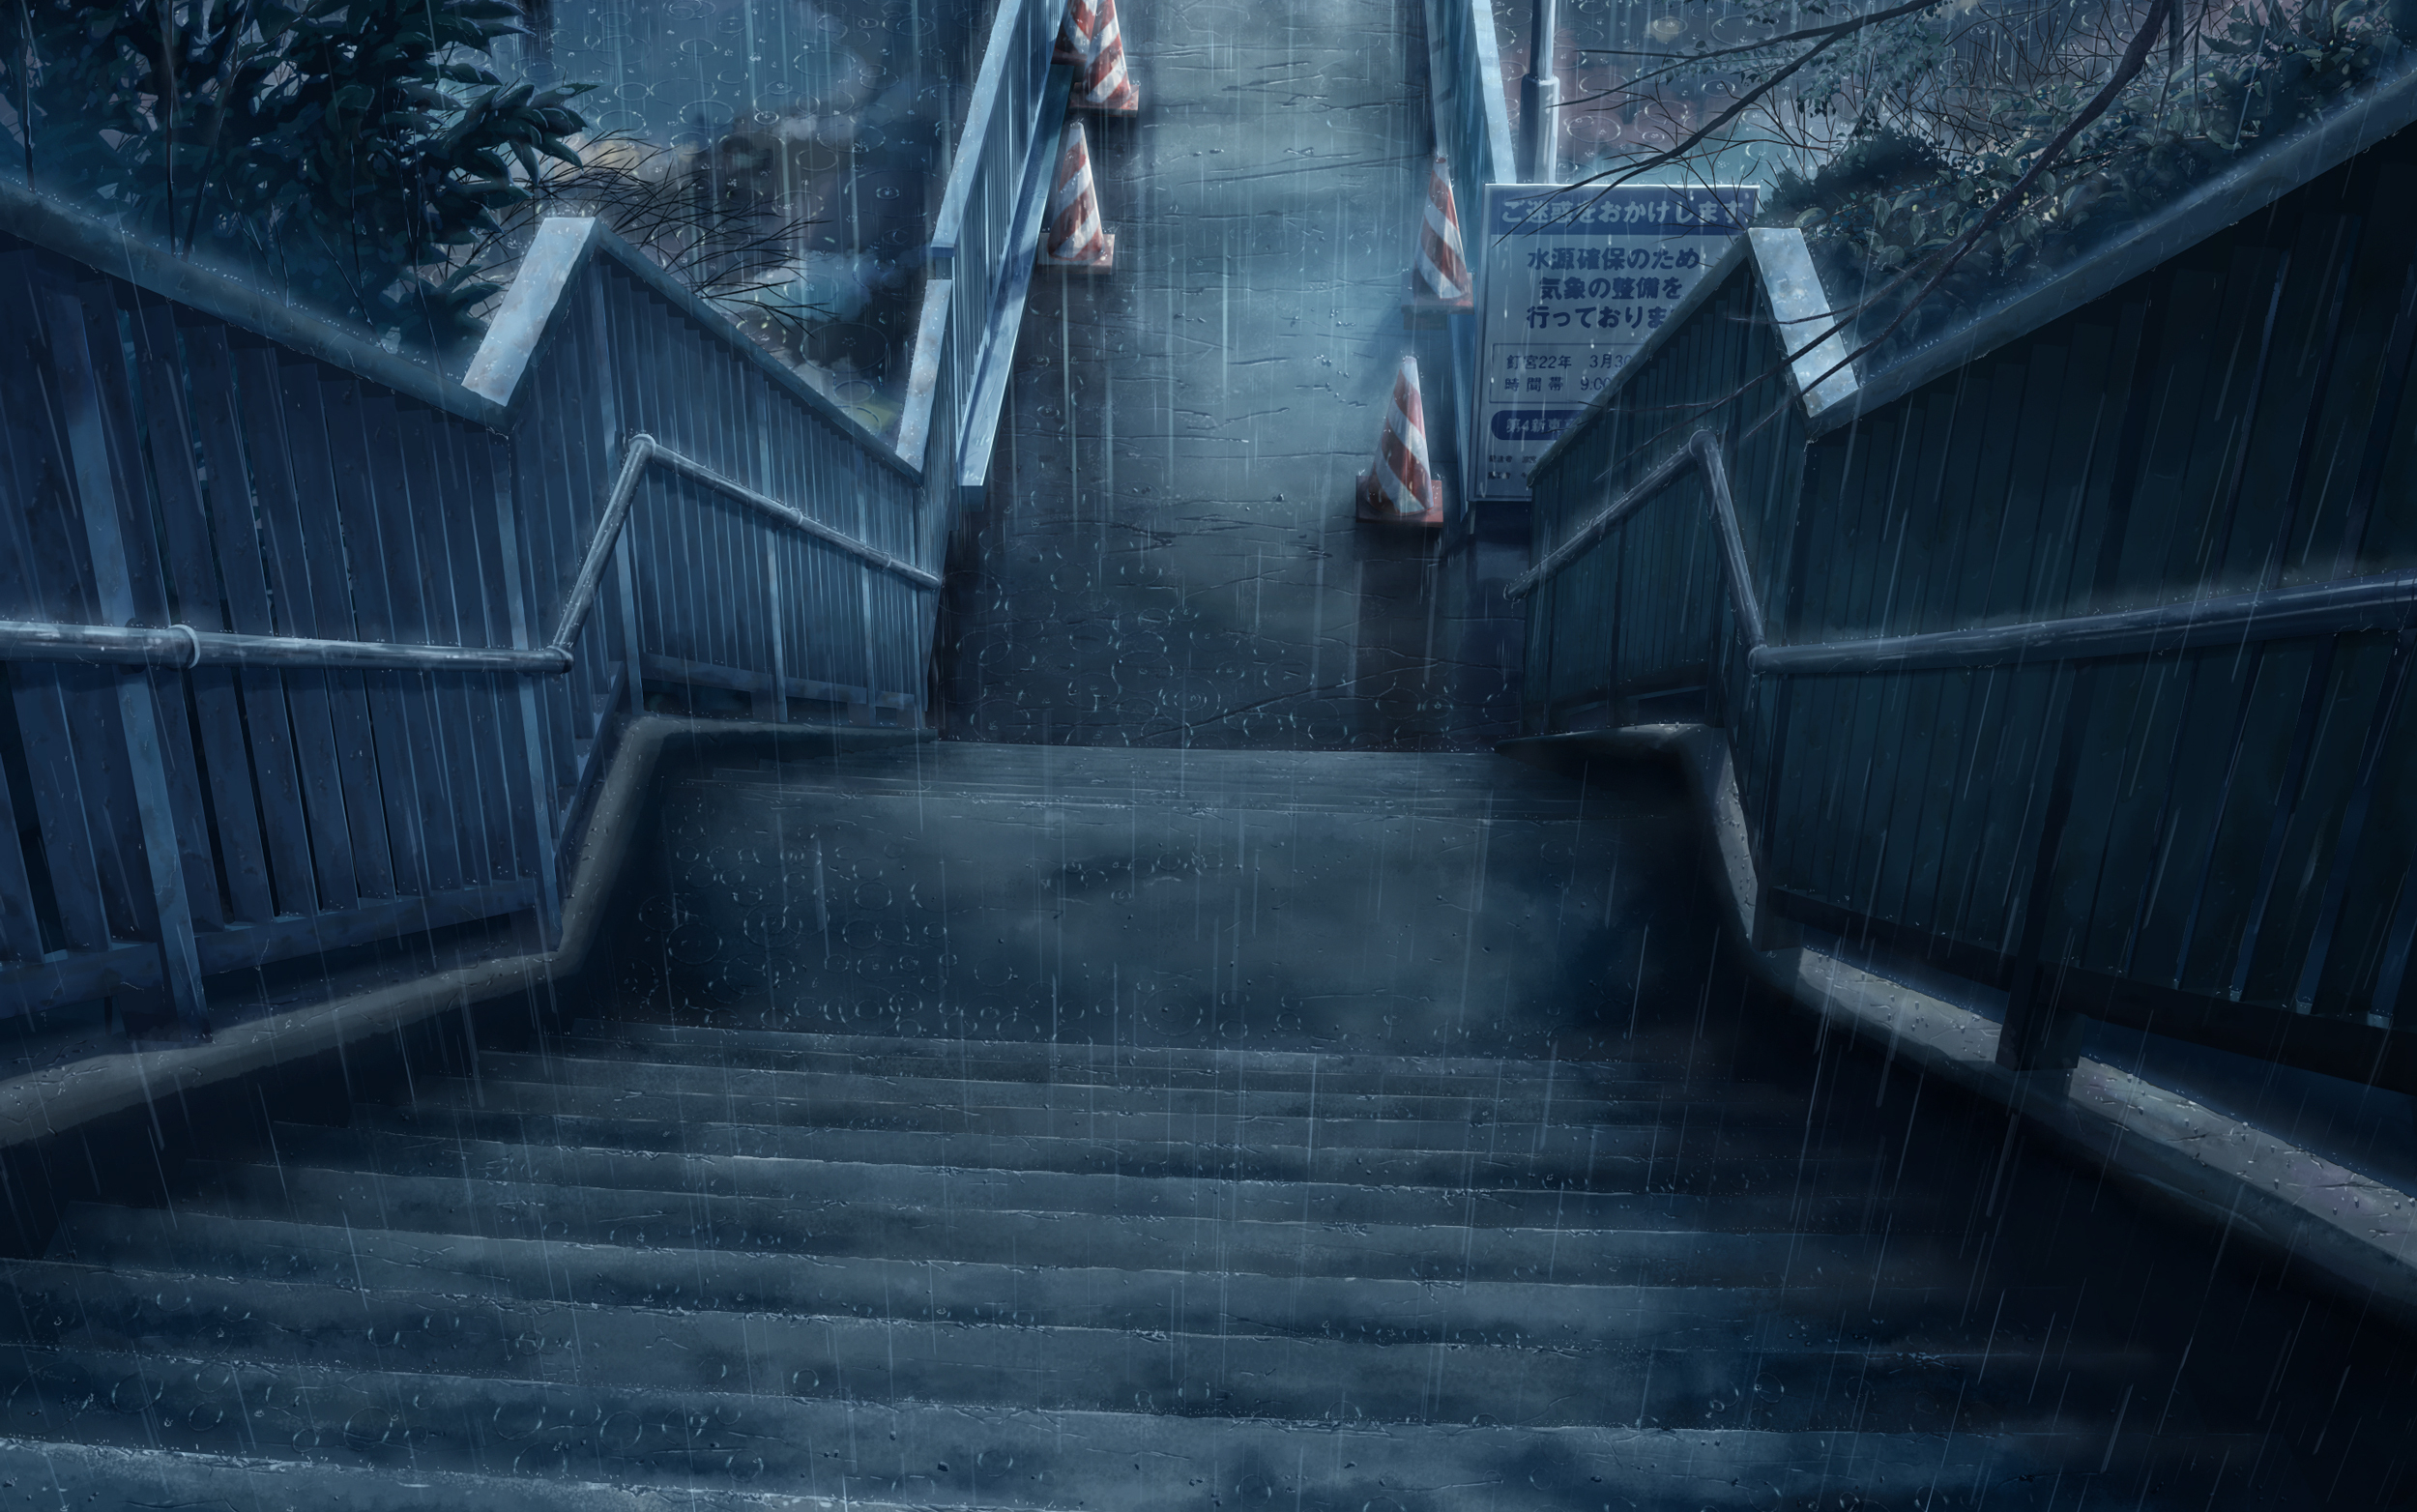 Rain-soaked stairs leading to a scenic destination.